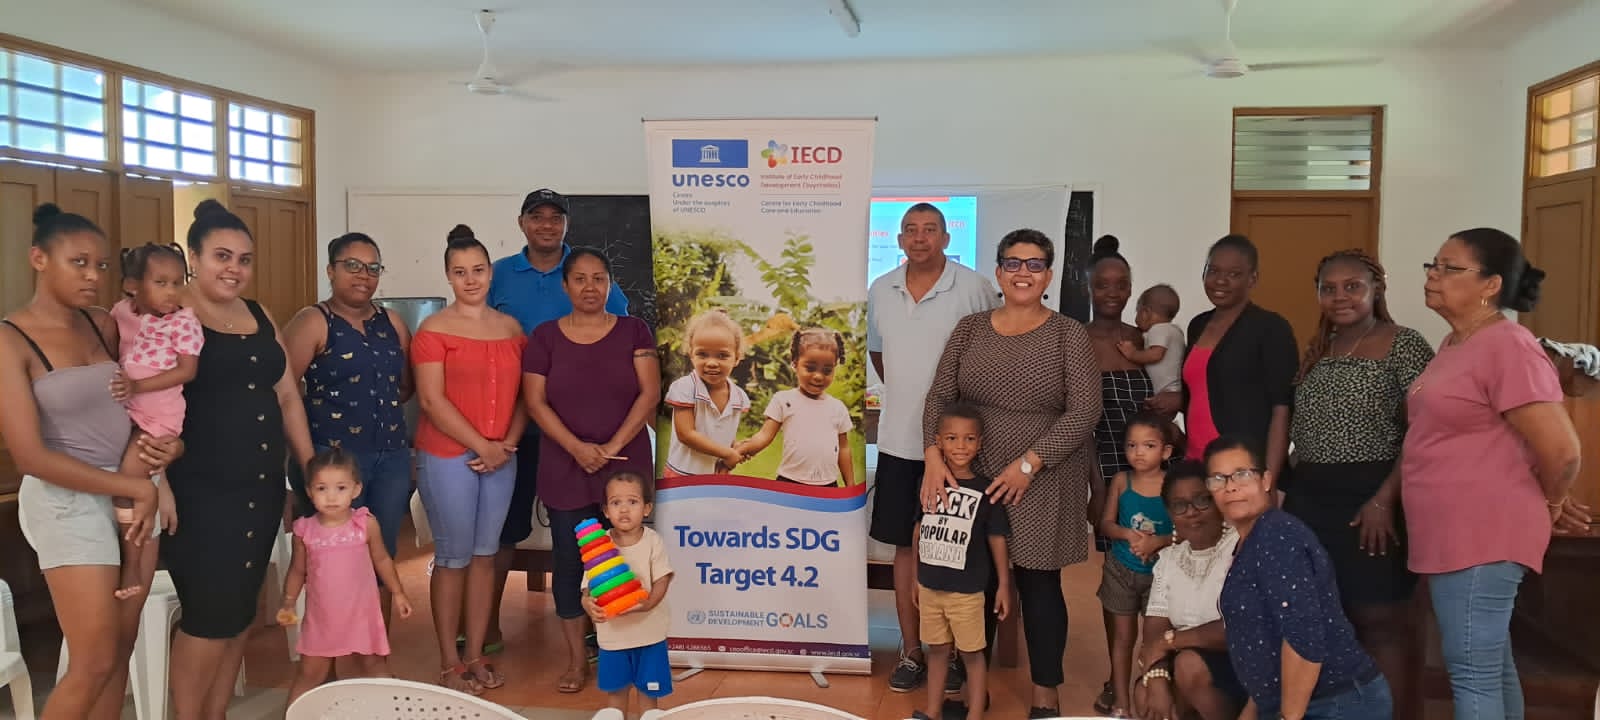 Empowering Parents Through Early Learning and Education Sensitization Sessions: (SENSPA Initiative) concluded with success